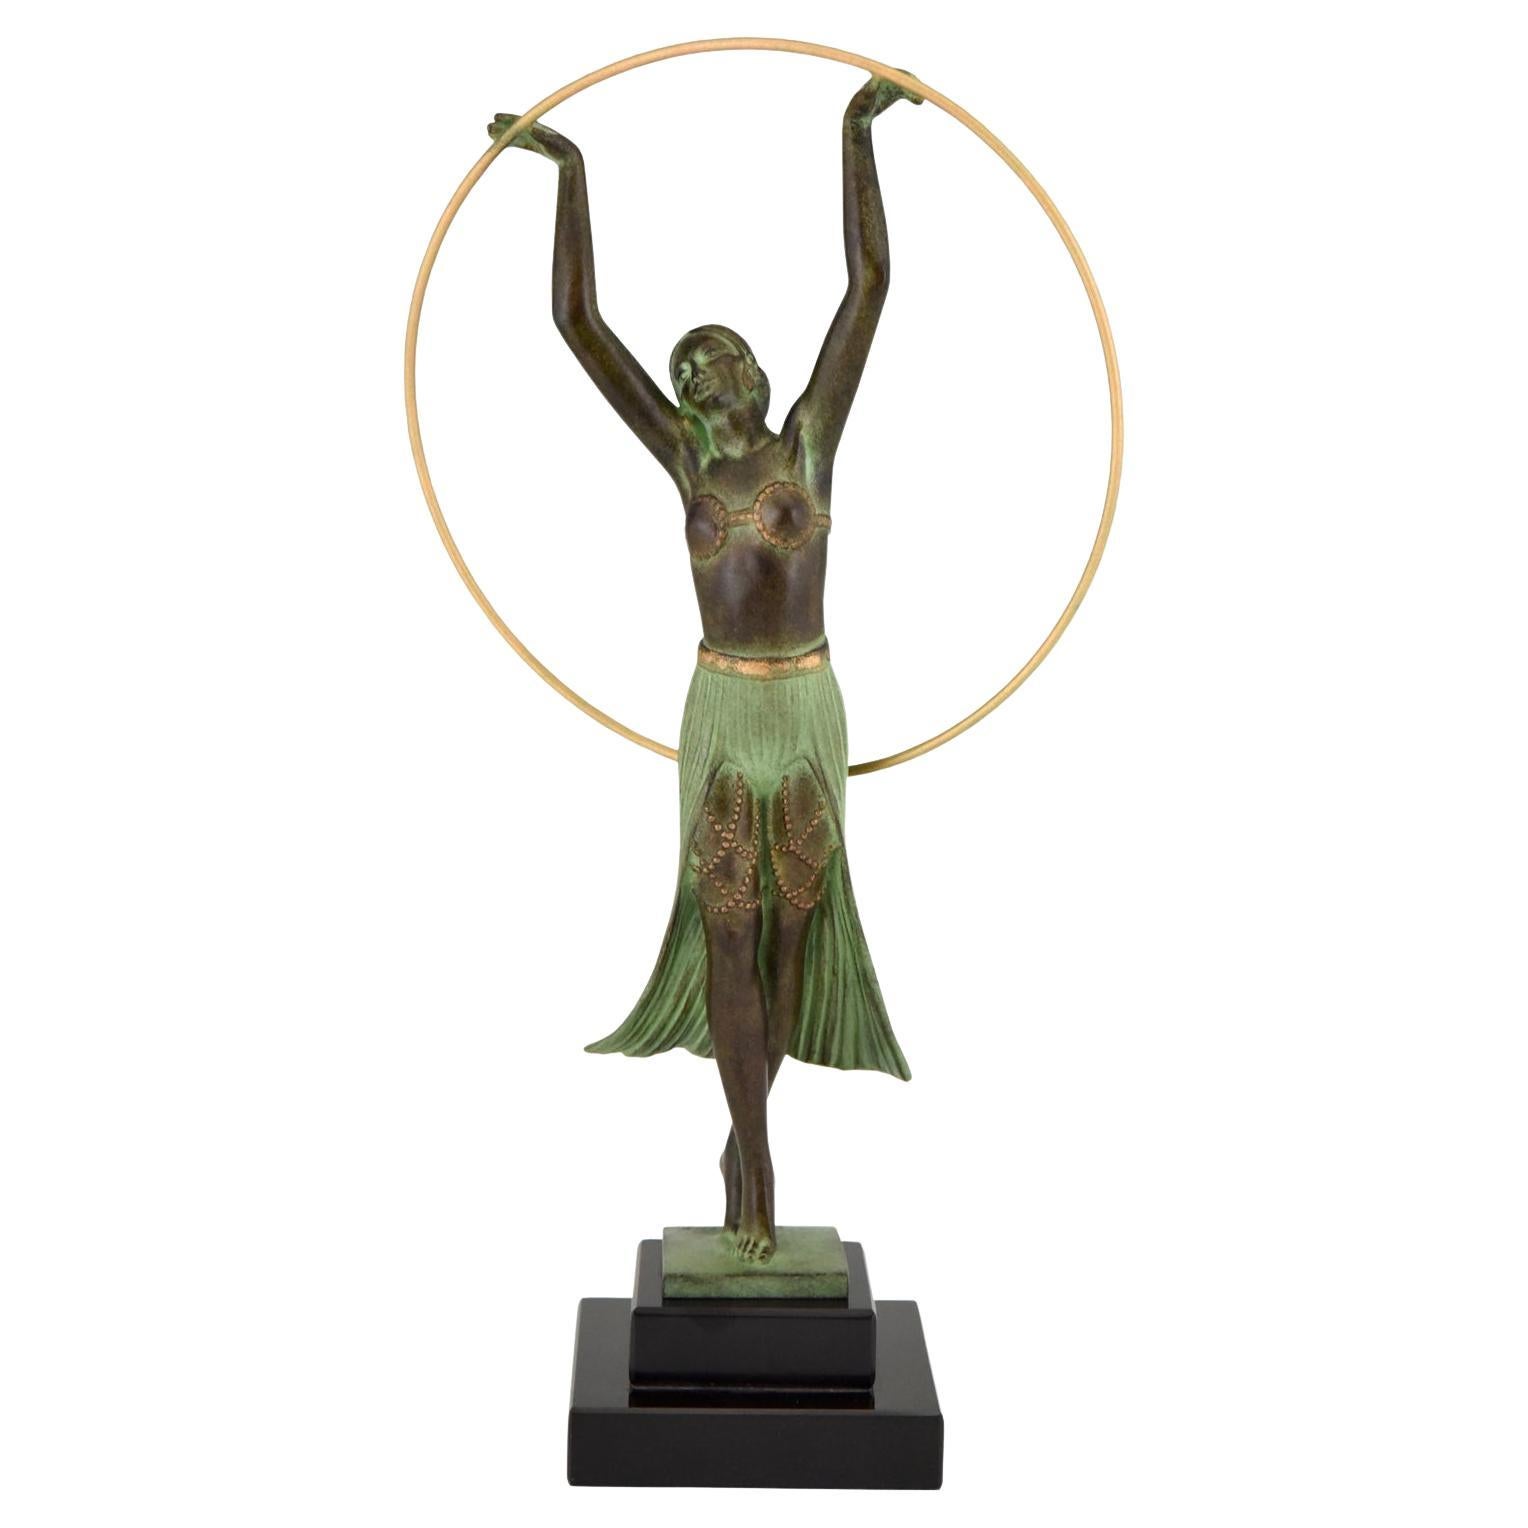 Art Deco style Sculpture BAYADERE Hoop Dancer by Charles for Max Le Verrier